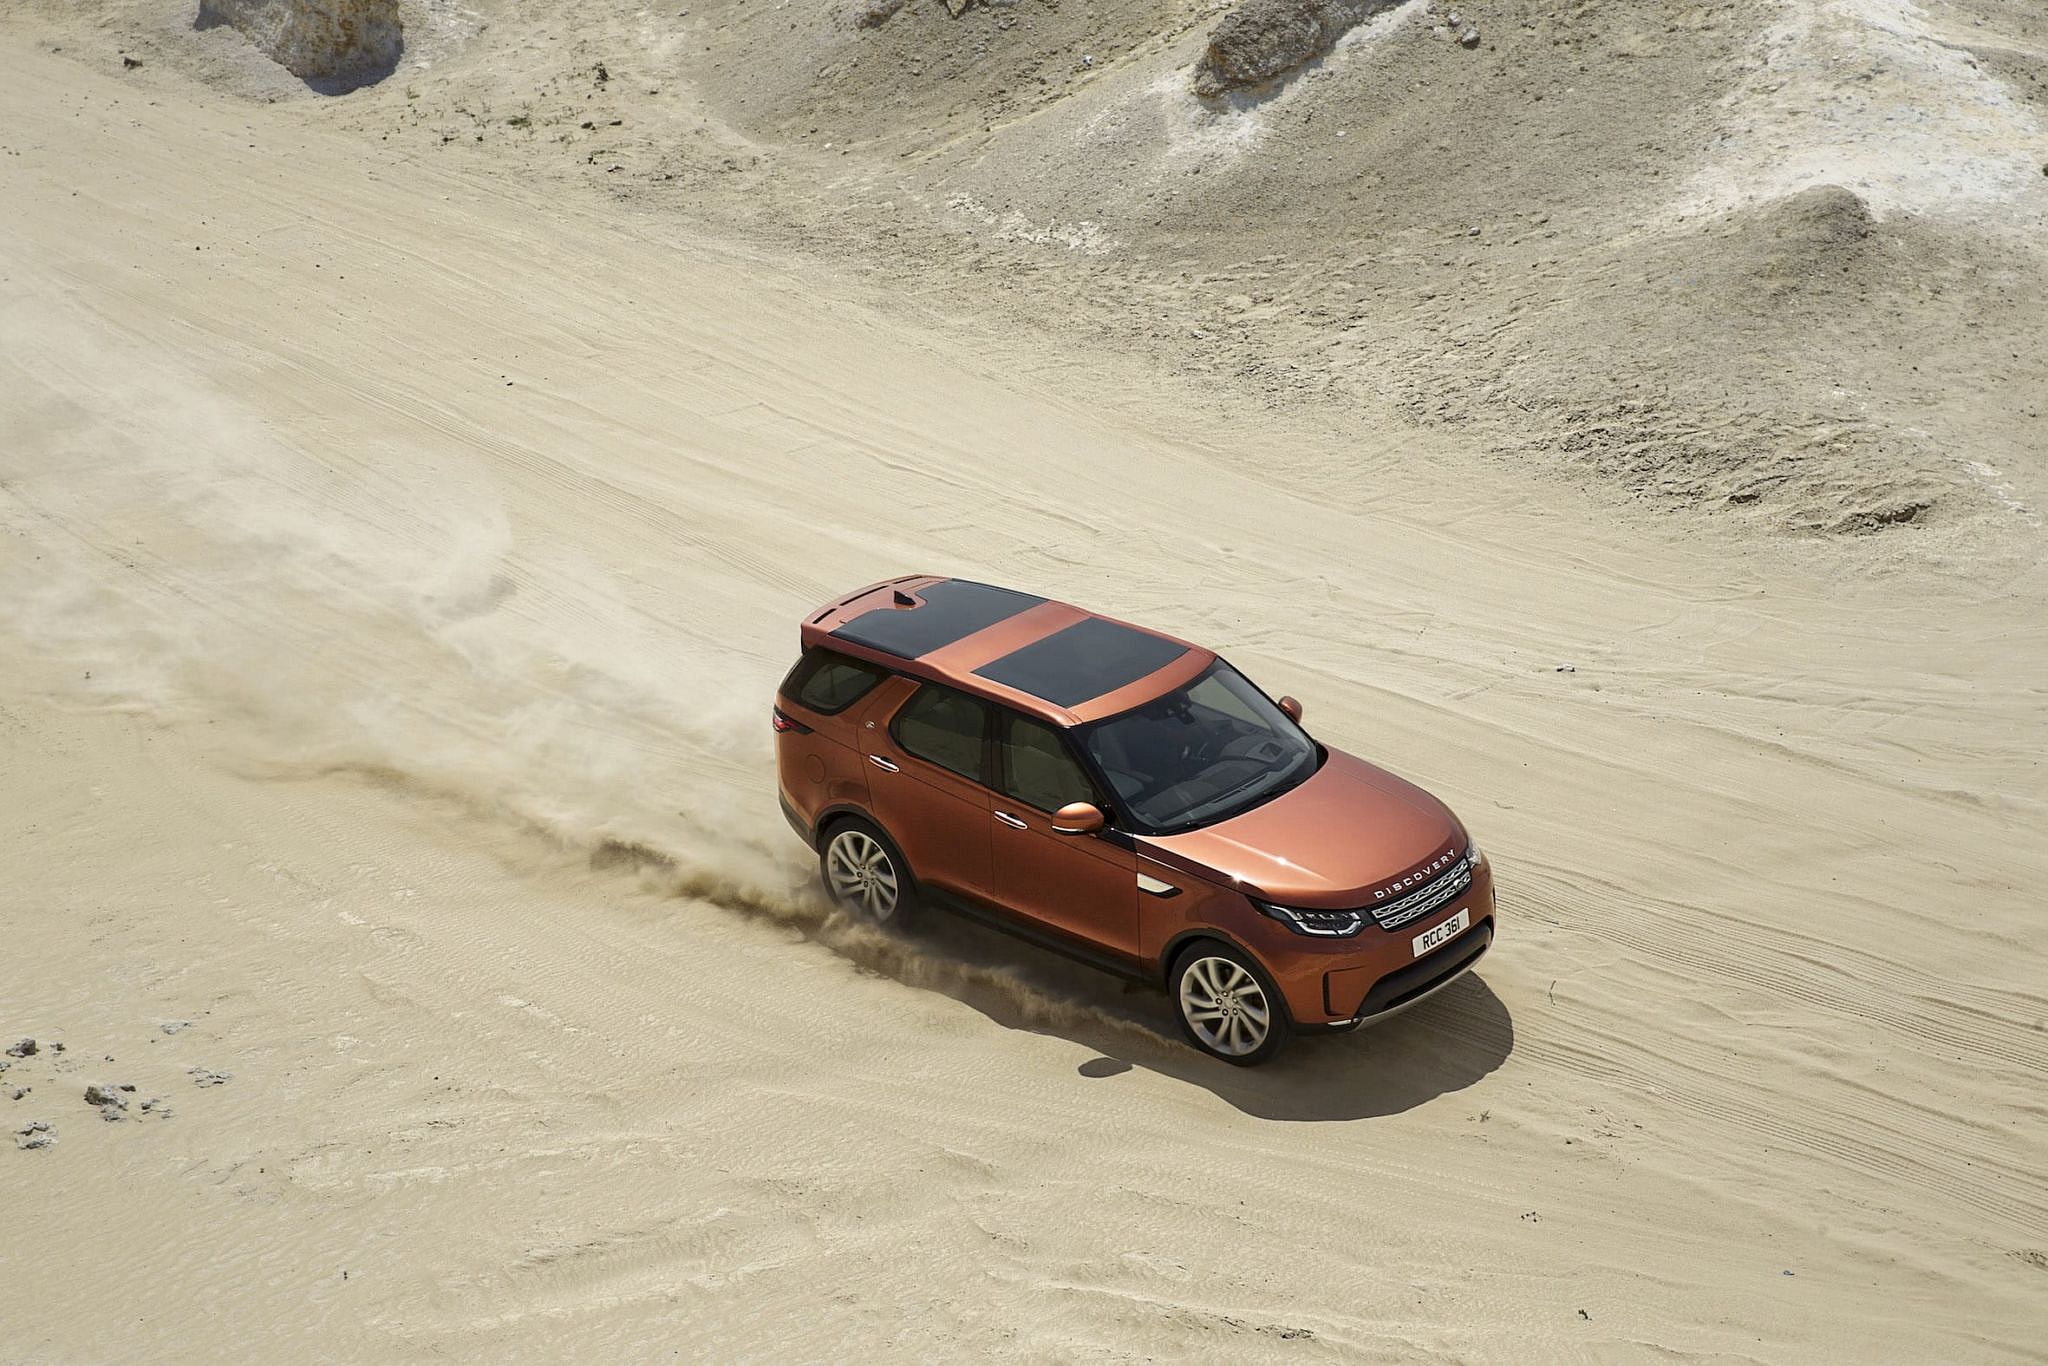 19-land-rover-onthult-all-new-discovery-suv-voor-het-hele-gezin